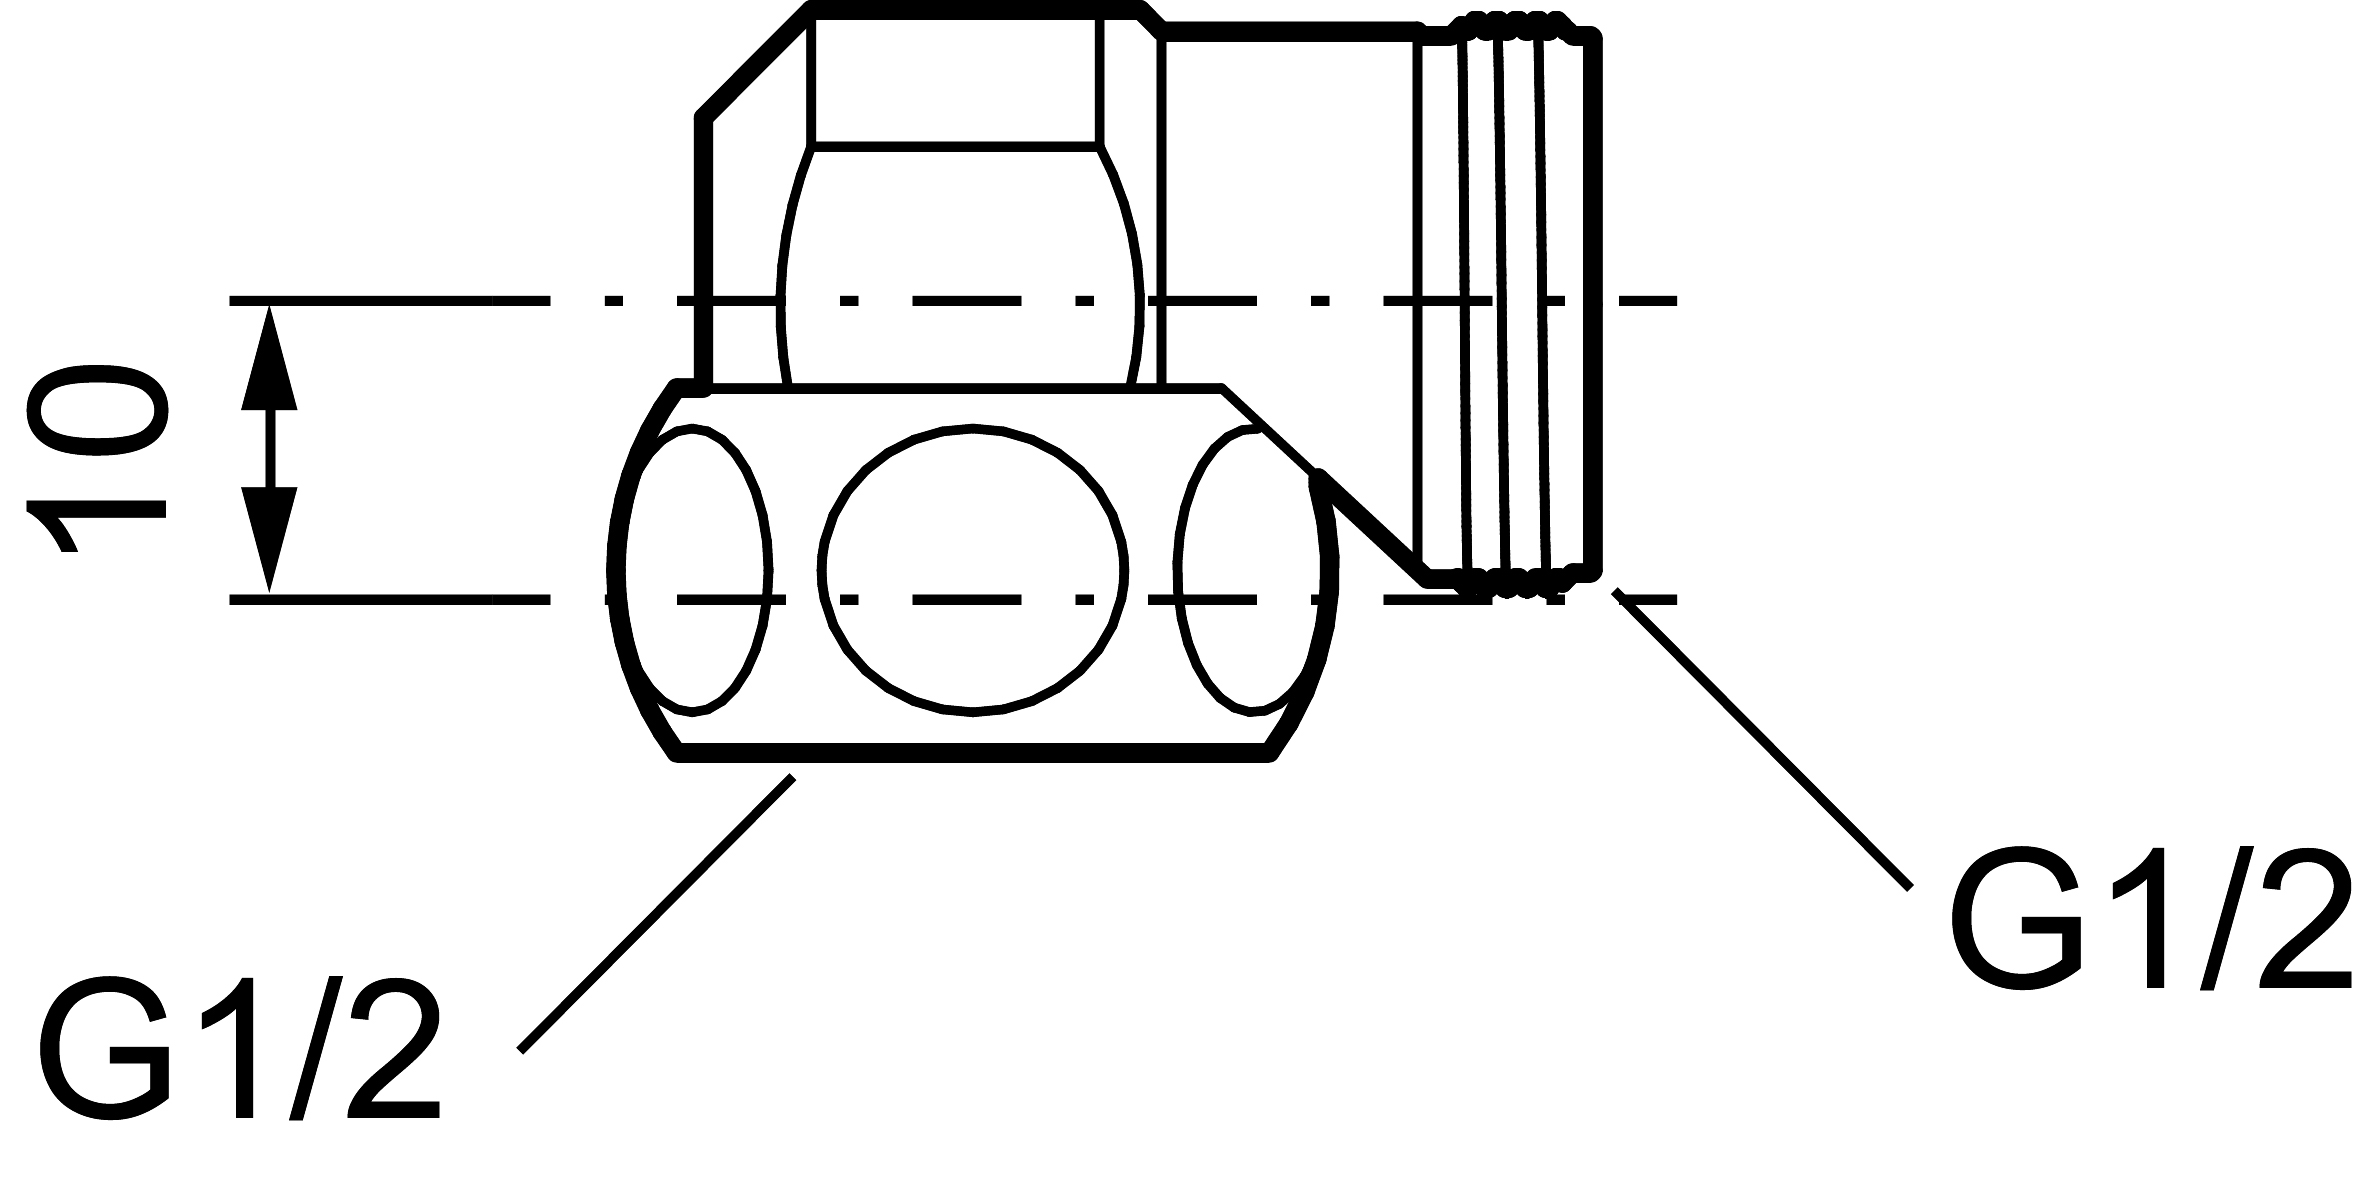 K4274-0000.png